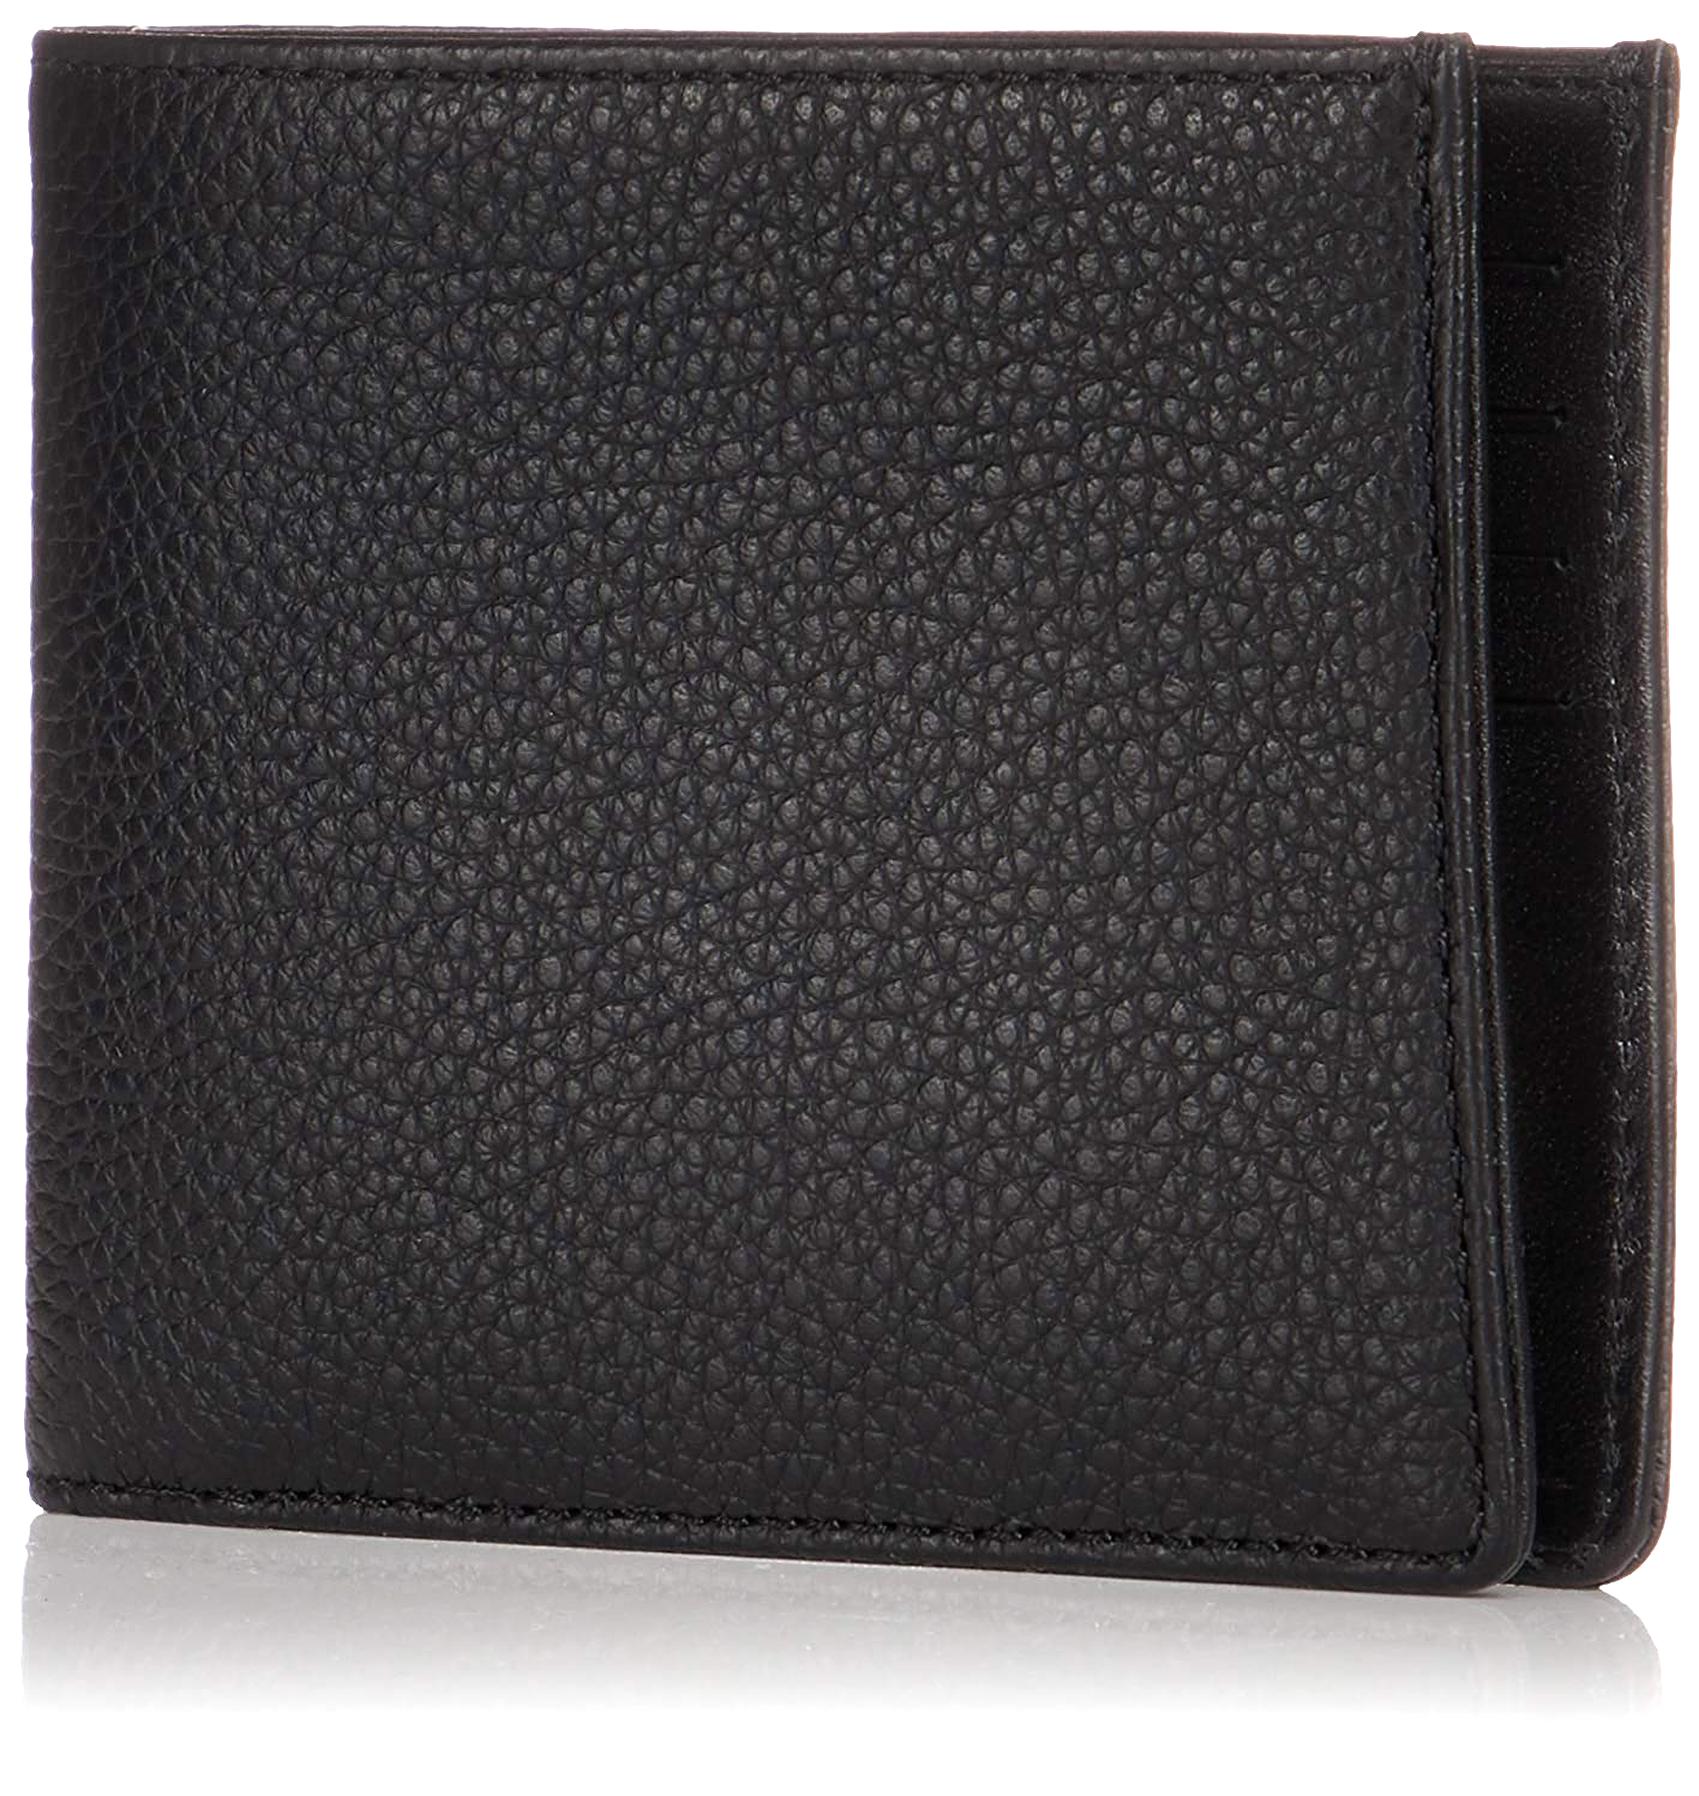 Dunhill Wallet for sale in UK | 68 used Dunhill Wallets